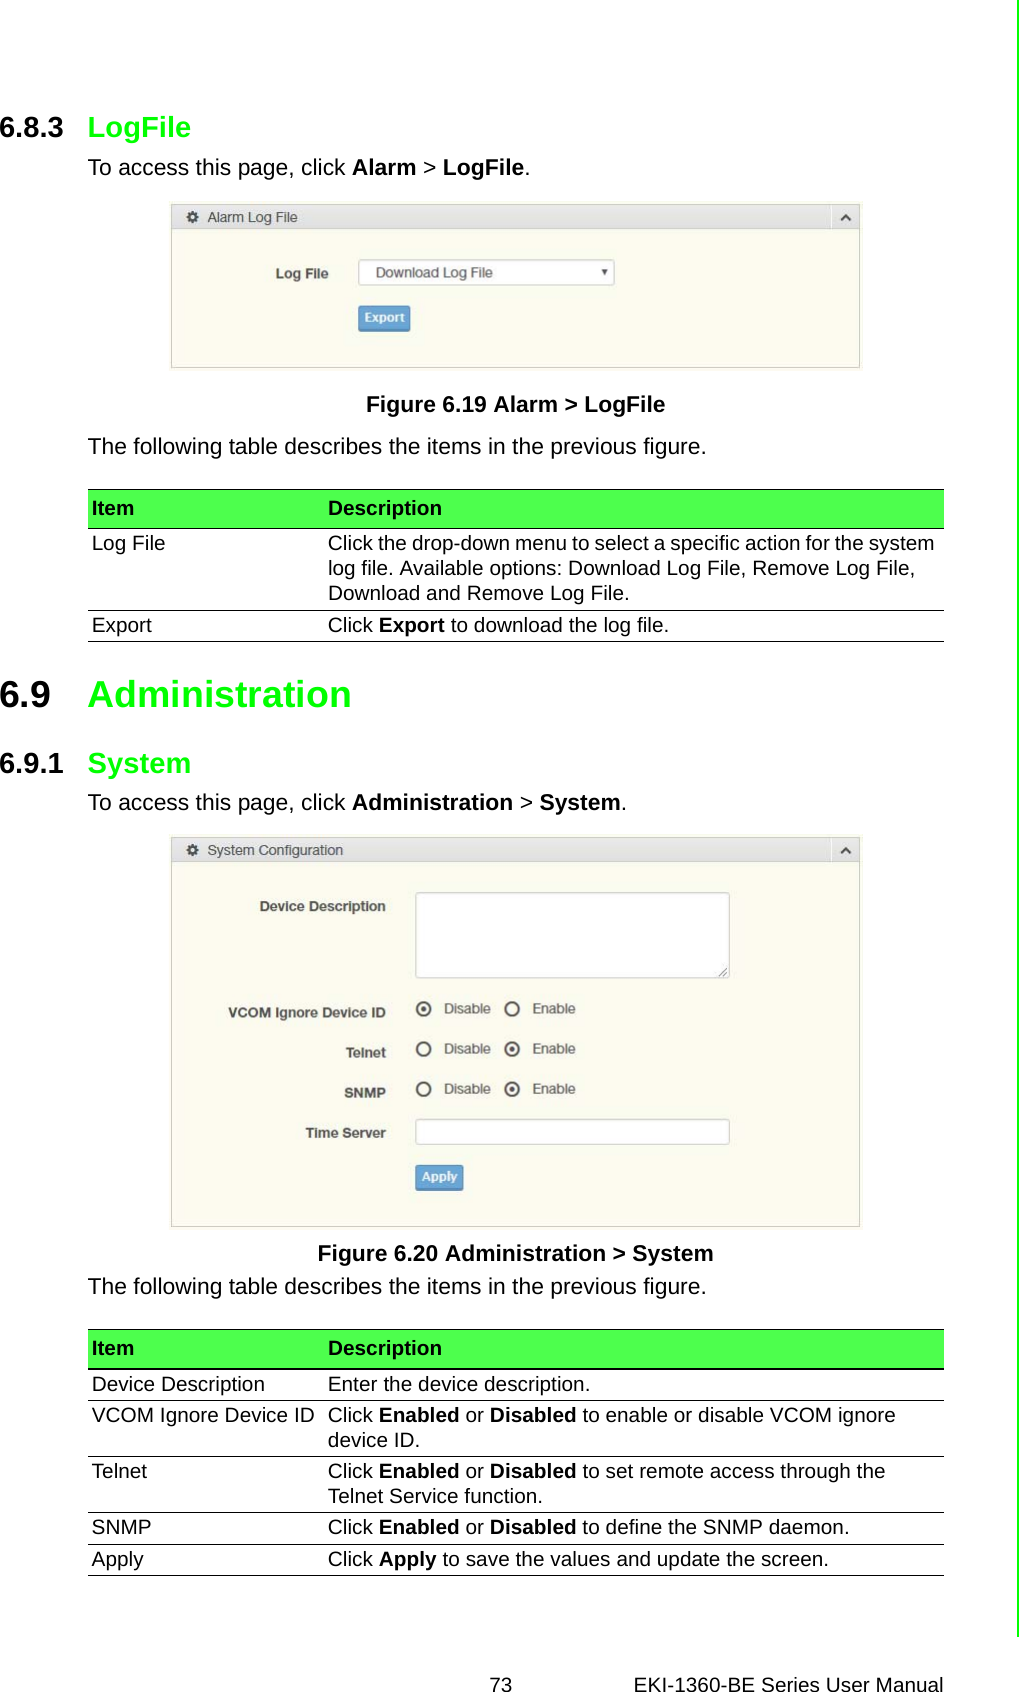 73 EKI-1360-BE Series User Manual 6.8.3 LogFileTo access this page, click Alarm &gt; LogFile.Figure 6.19 Alarm &gt; LogFileThe following table describes the items in the previous figure.6.9 Administration6.9.1 SystemTo access this page, click Administration &gt; System.Figure 6.20 Administration &gt; SystemThe following table describes the items in the previous figure.Item DescriptionLog File Click the drop-down menu to select a specific action for the system log file. Available options: Download Log File, Remove Log File, Download and Remove Log File.Export Click Export to download the log file.Item DescriptionDevice Description Enter the device description.VCOM Ignore Device ID Click Enabled or Disabled to enable or disable VCOM ignore device ID.Telnet Click Enabled or Disabled to set remote access through the Telnet Service function.SNMP Click Enabled or Disabled to define the SNMP daemon.Apply Click Apply to save the values and update the screen.